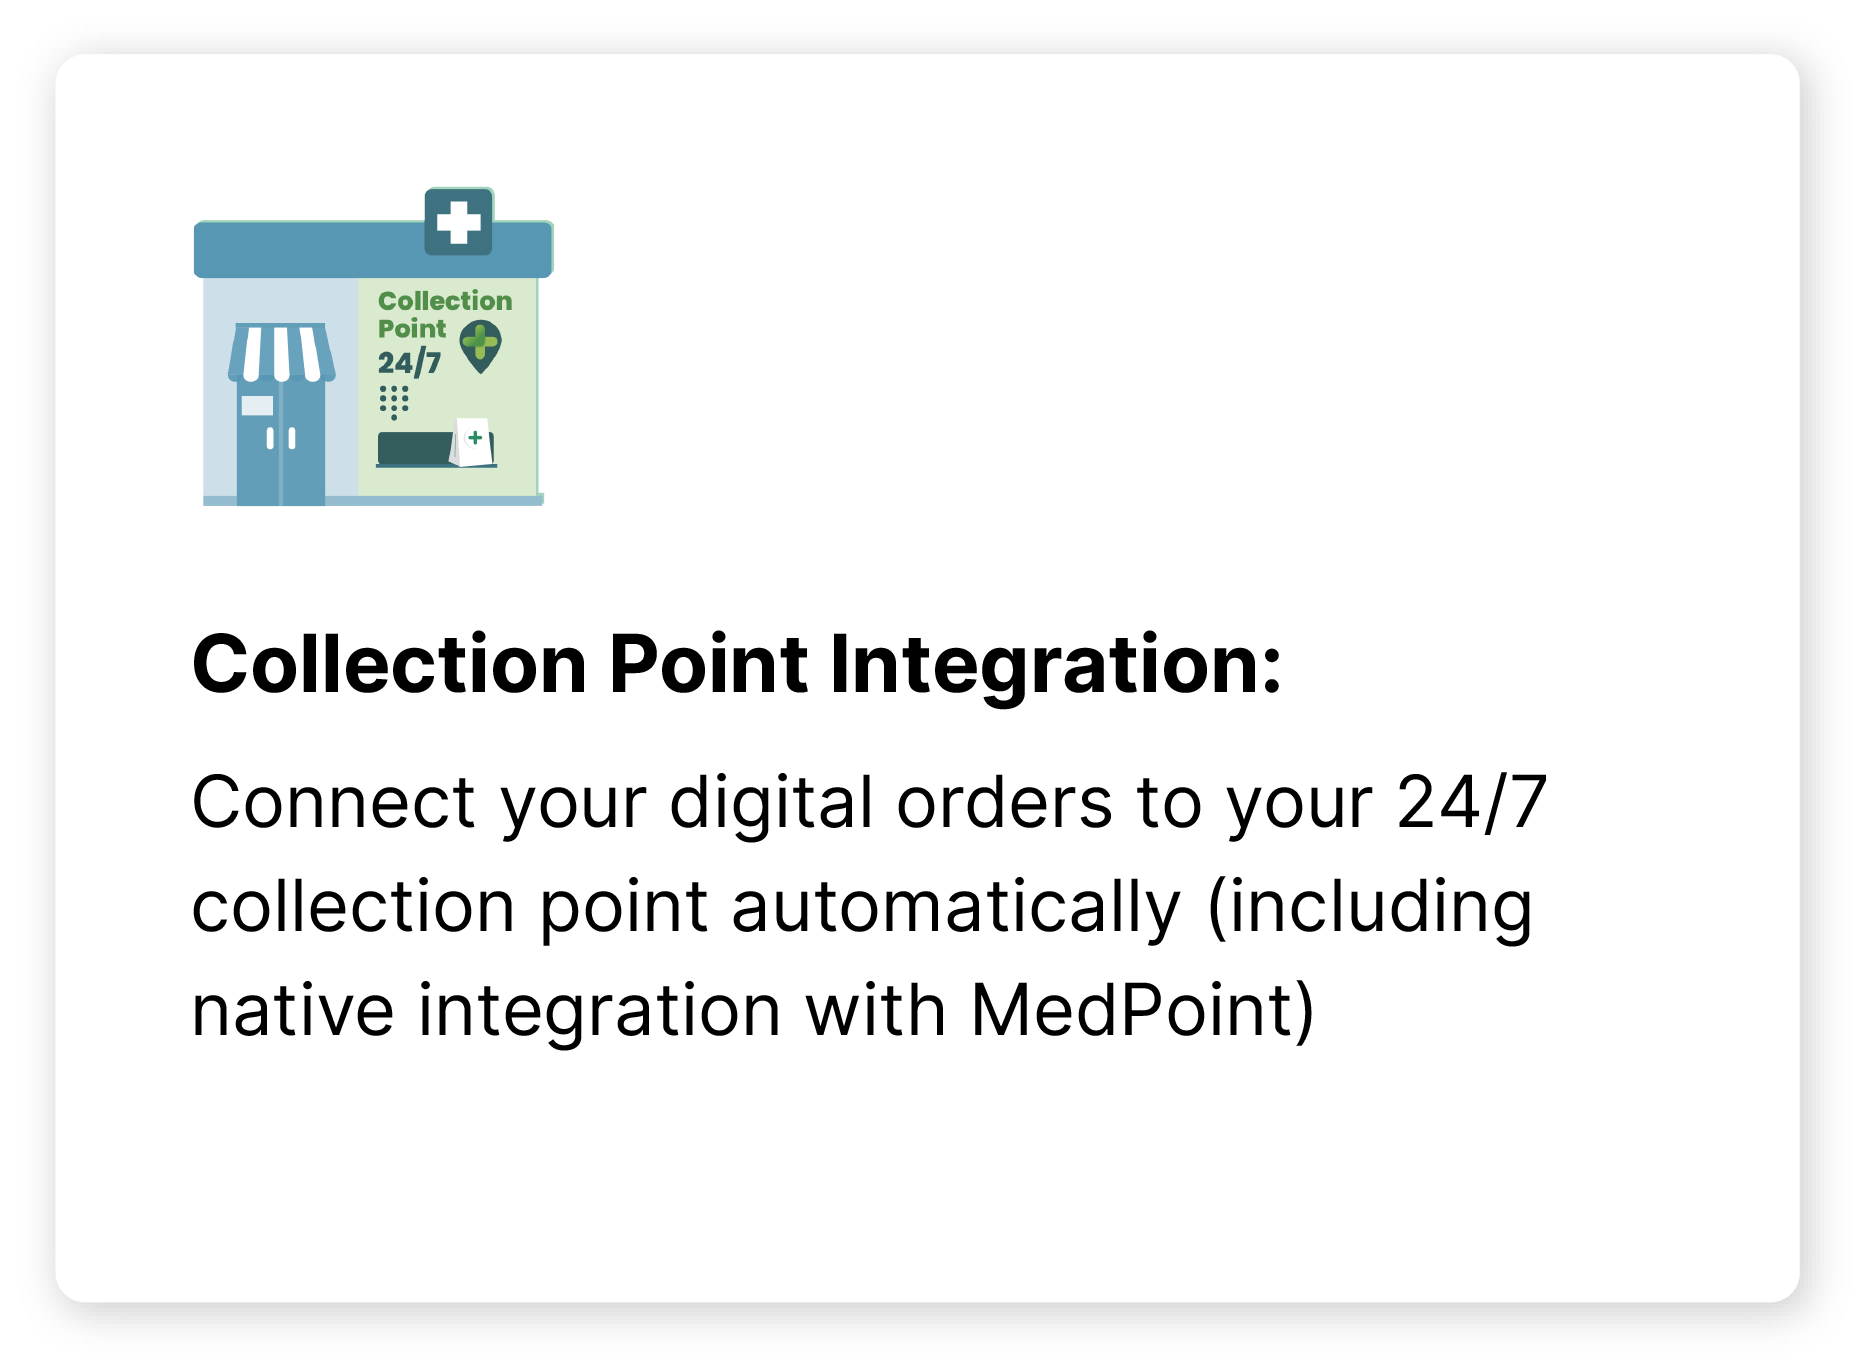 B2B Carousel - Collection Point Integration@4x